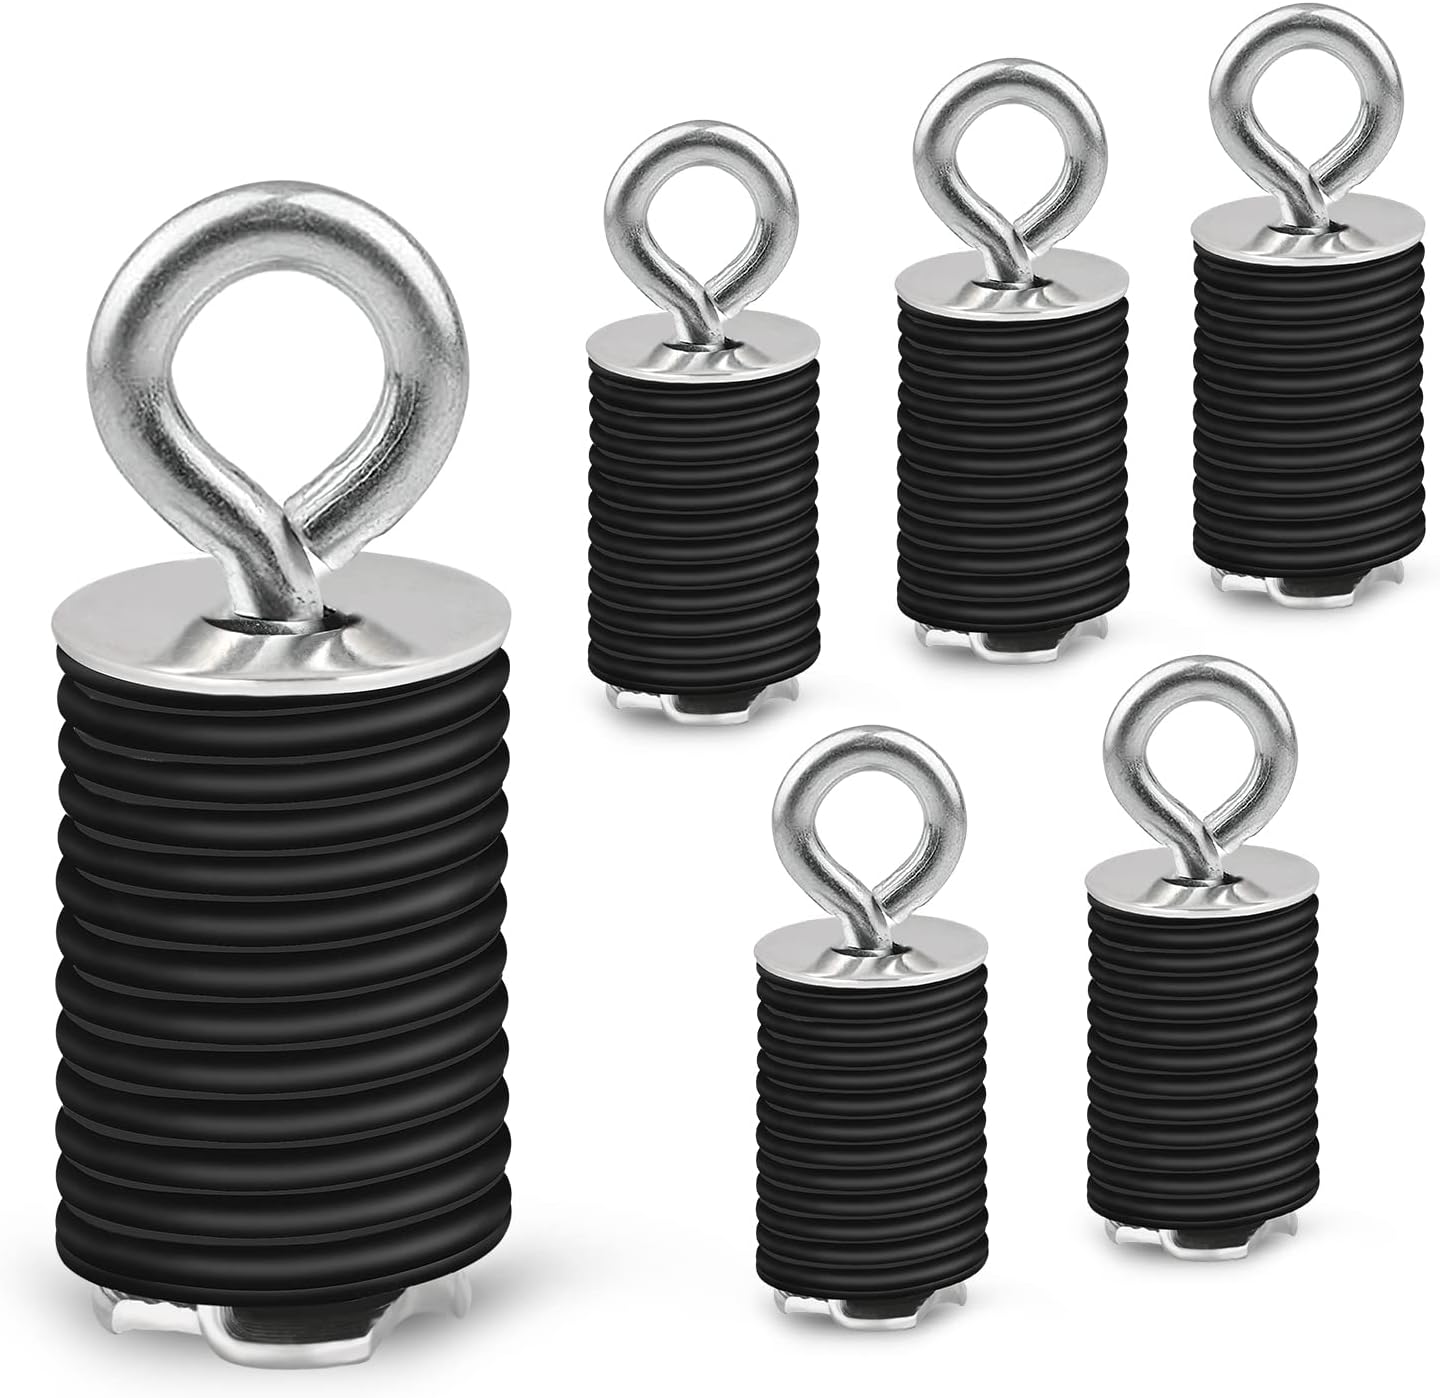 Tie Down Anchors Compatible with Polaris RZR 900 1000 XP Turbo Sportsman 450 570 850 ACE 500 570 EPS 900 XC -DO NOT FIT Ranger and General(Set of 6)